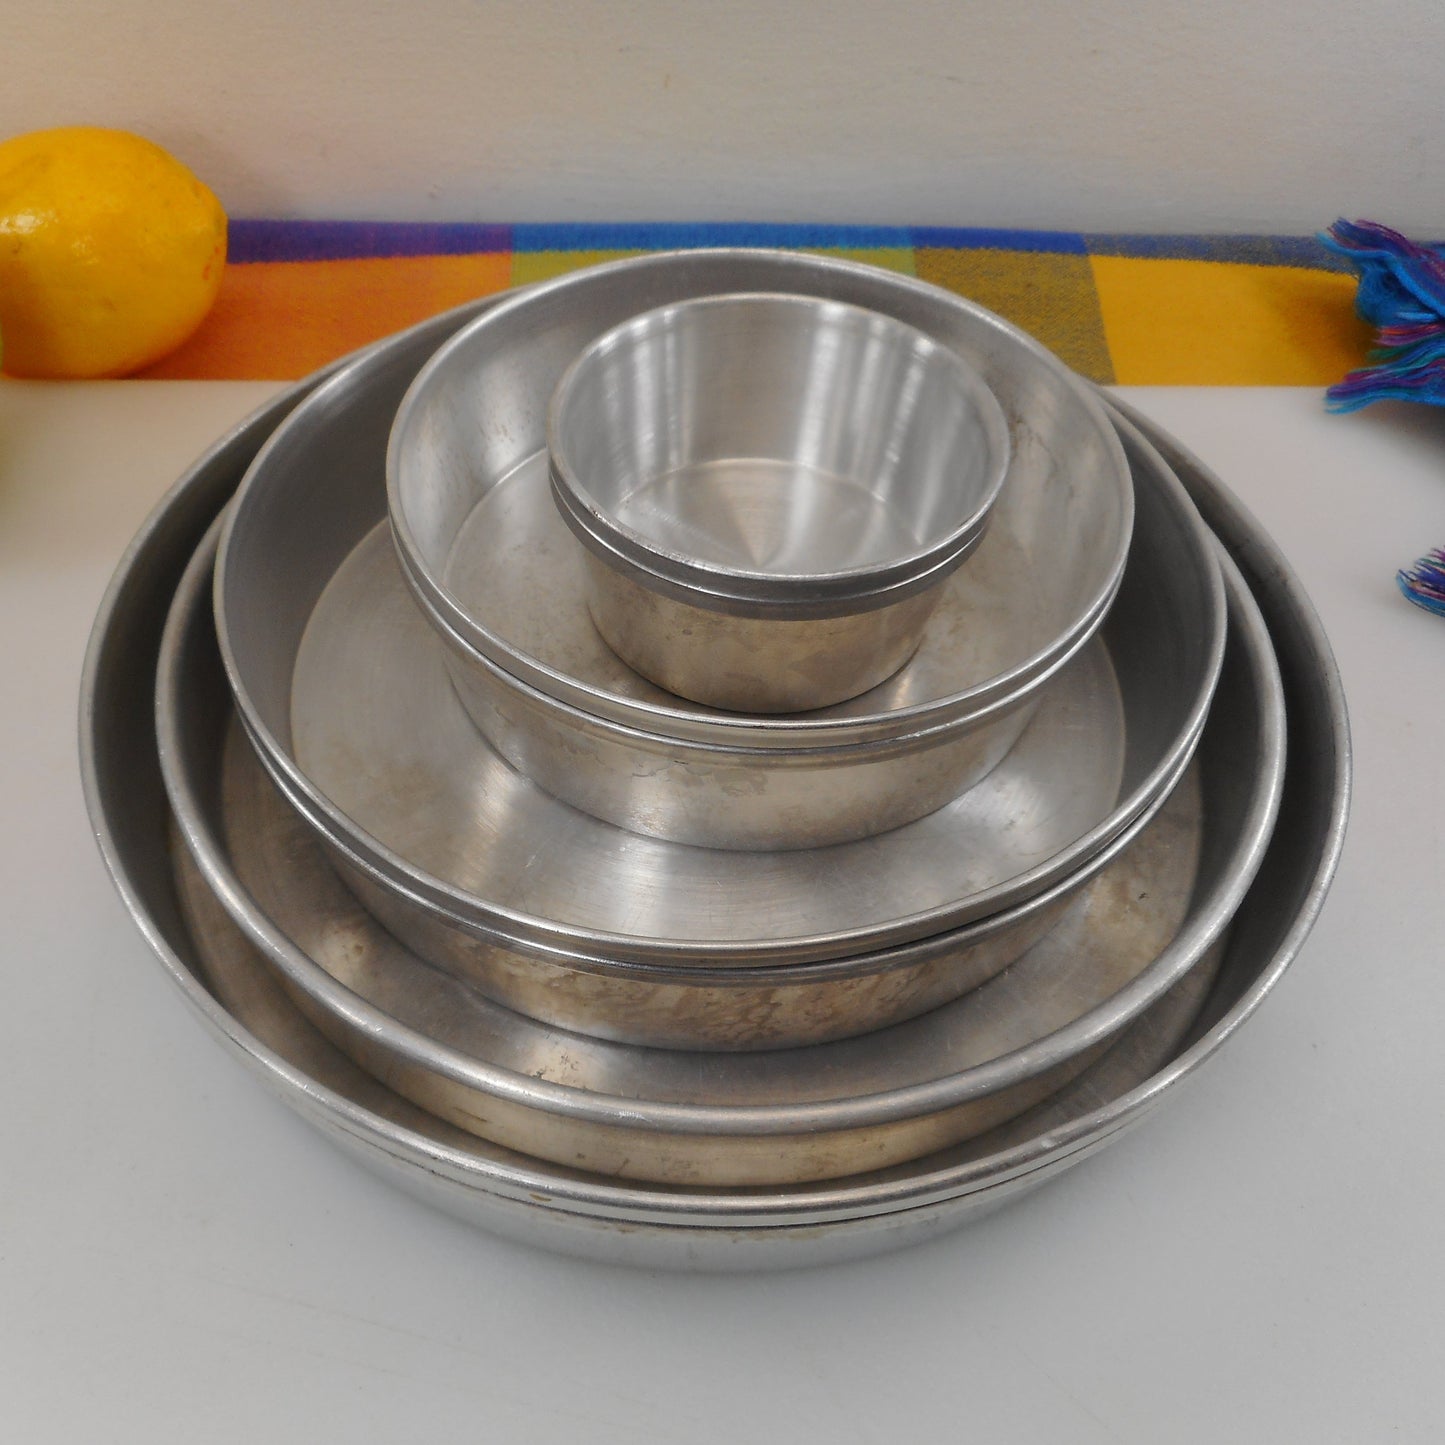 Round Aluminum Cake Pan 9 Lot - Mirro Vitality Wear Ever Unbranded 3" 5.5" 7.5" 8" 9"